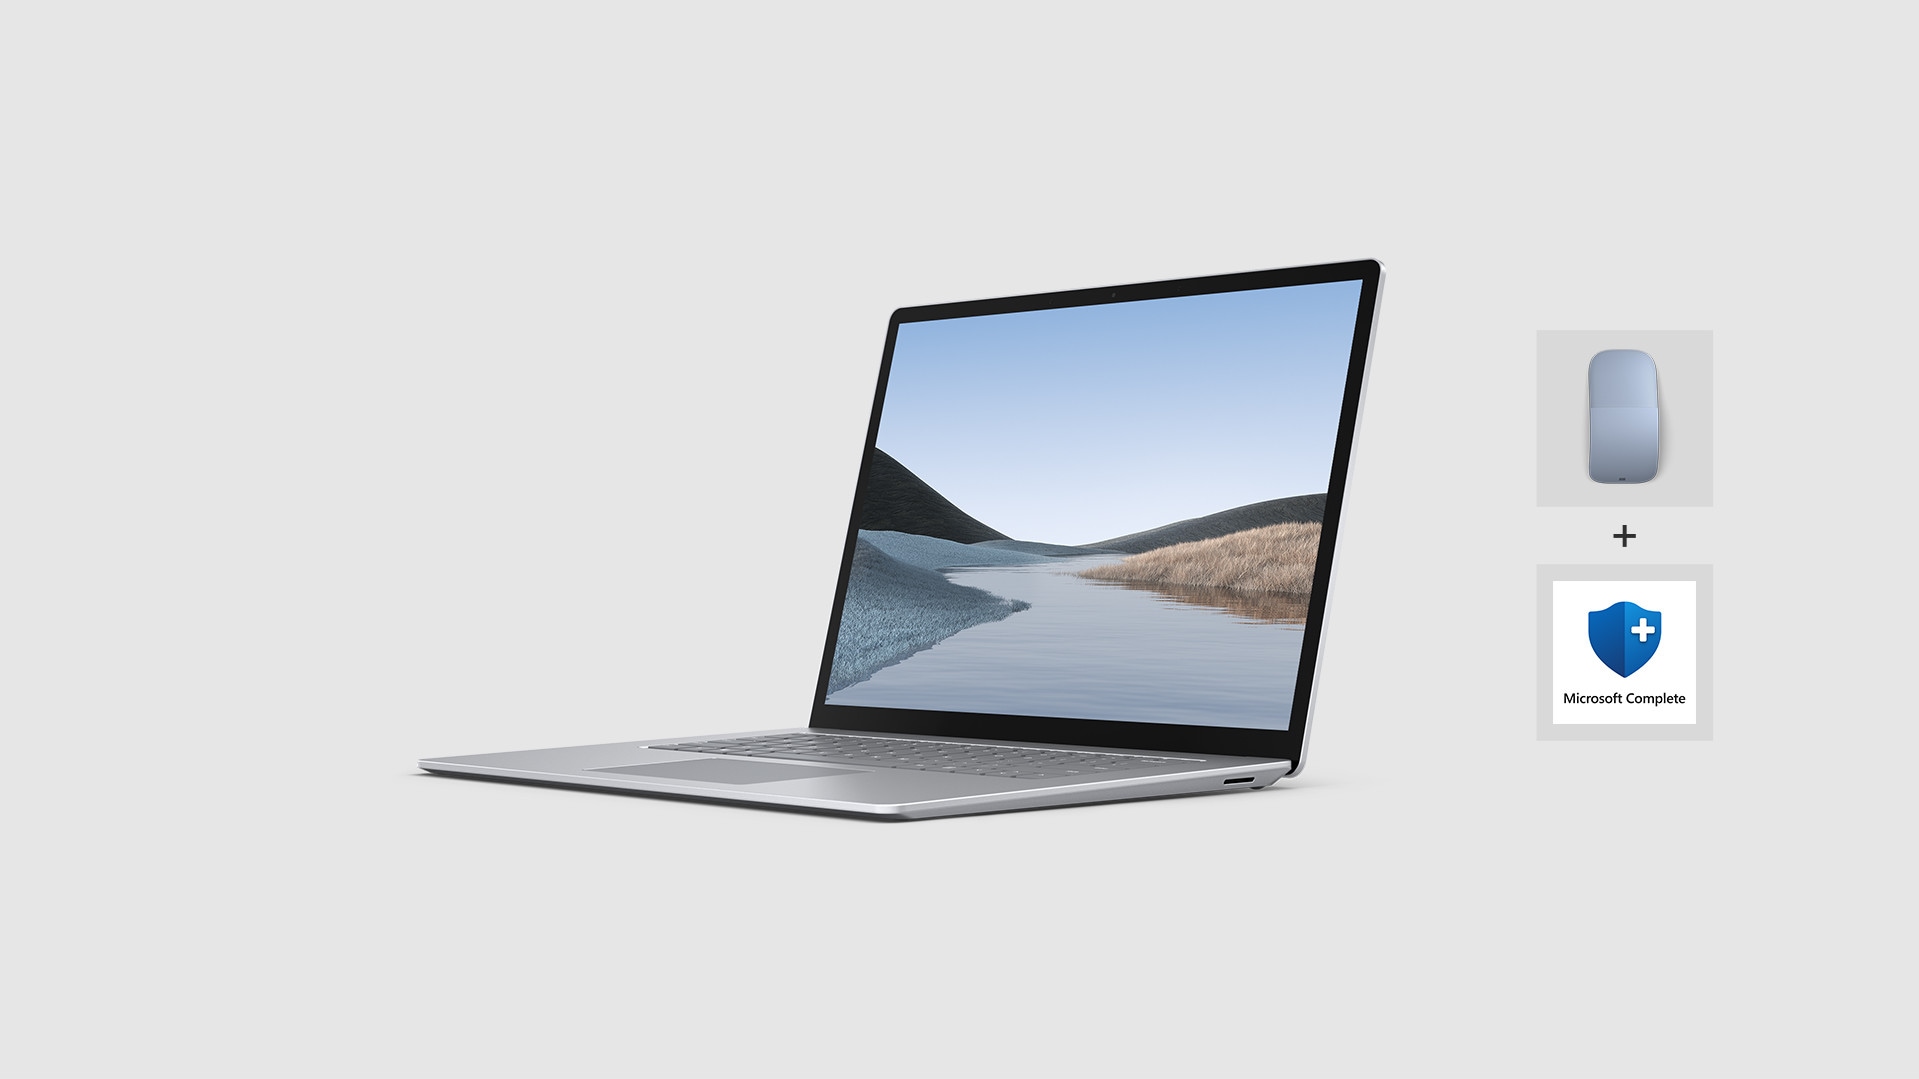 Surface Laptop 3 with Surface Arc Mouse and Microsoft Complete